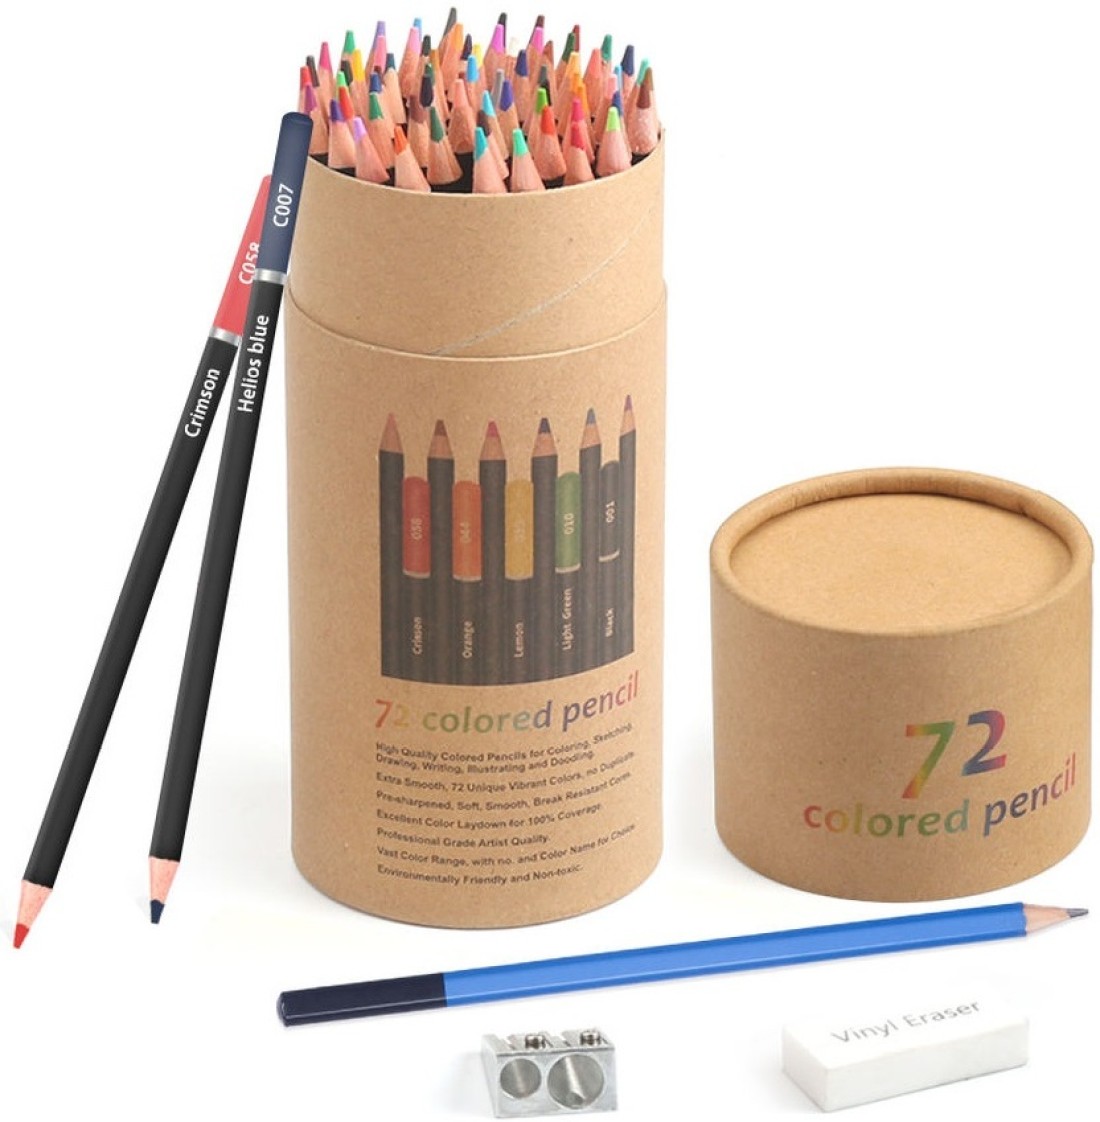  H & B 72-Color Colored Pencils Set with Coloring Book, Eraser,  and Sharpener - Perfect for Drawing and Coloring - Soft Oil-Based Cores  Ideal for Adults, Kids, and Beginners 